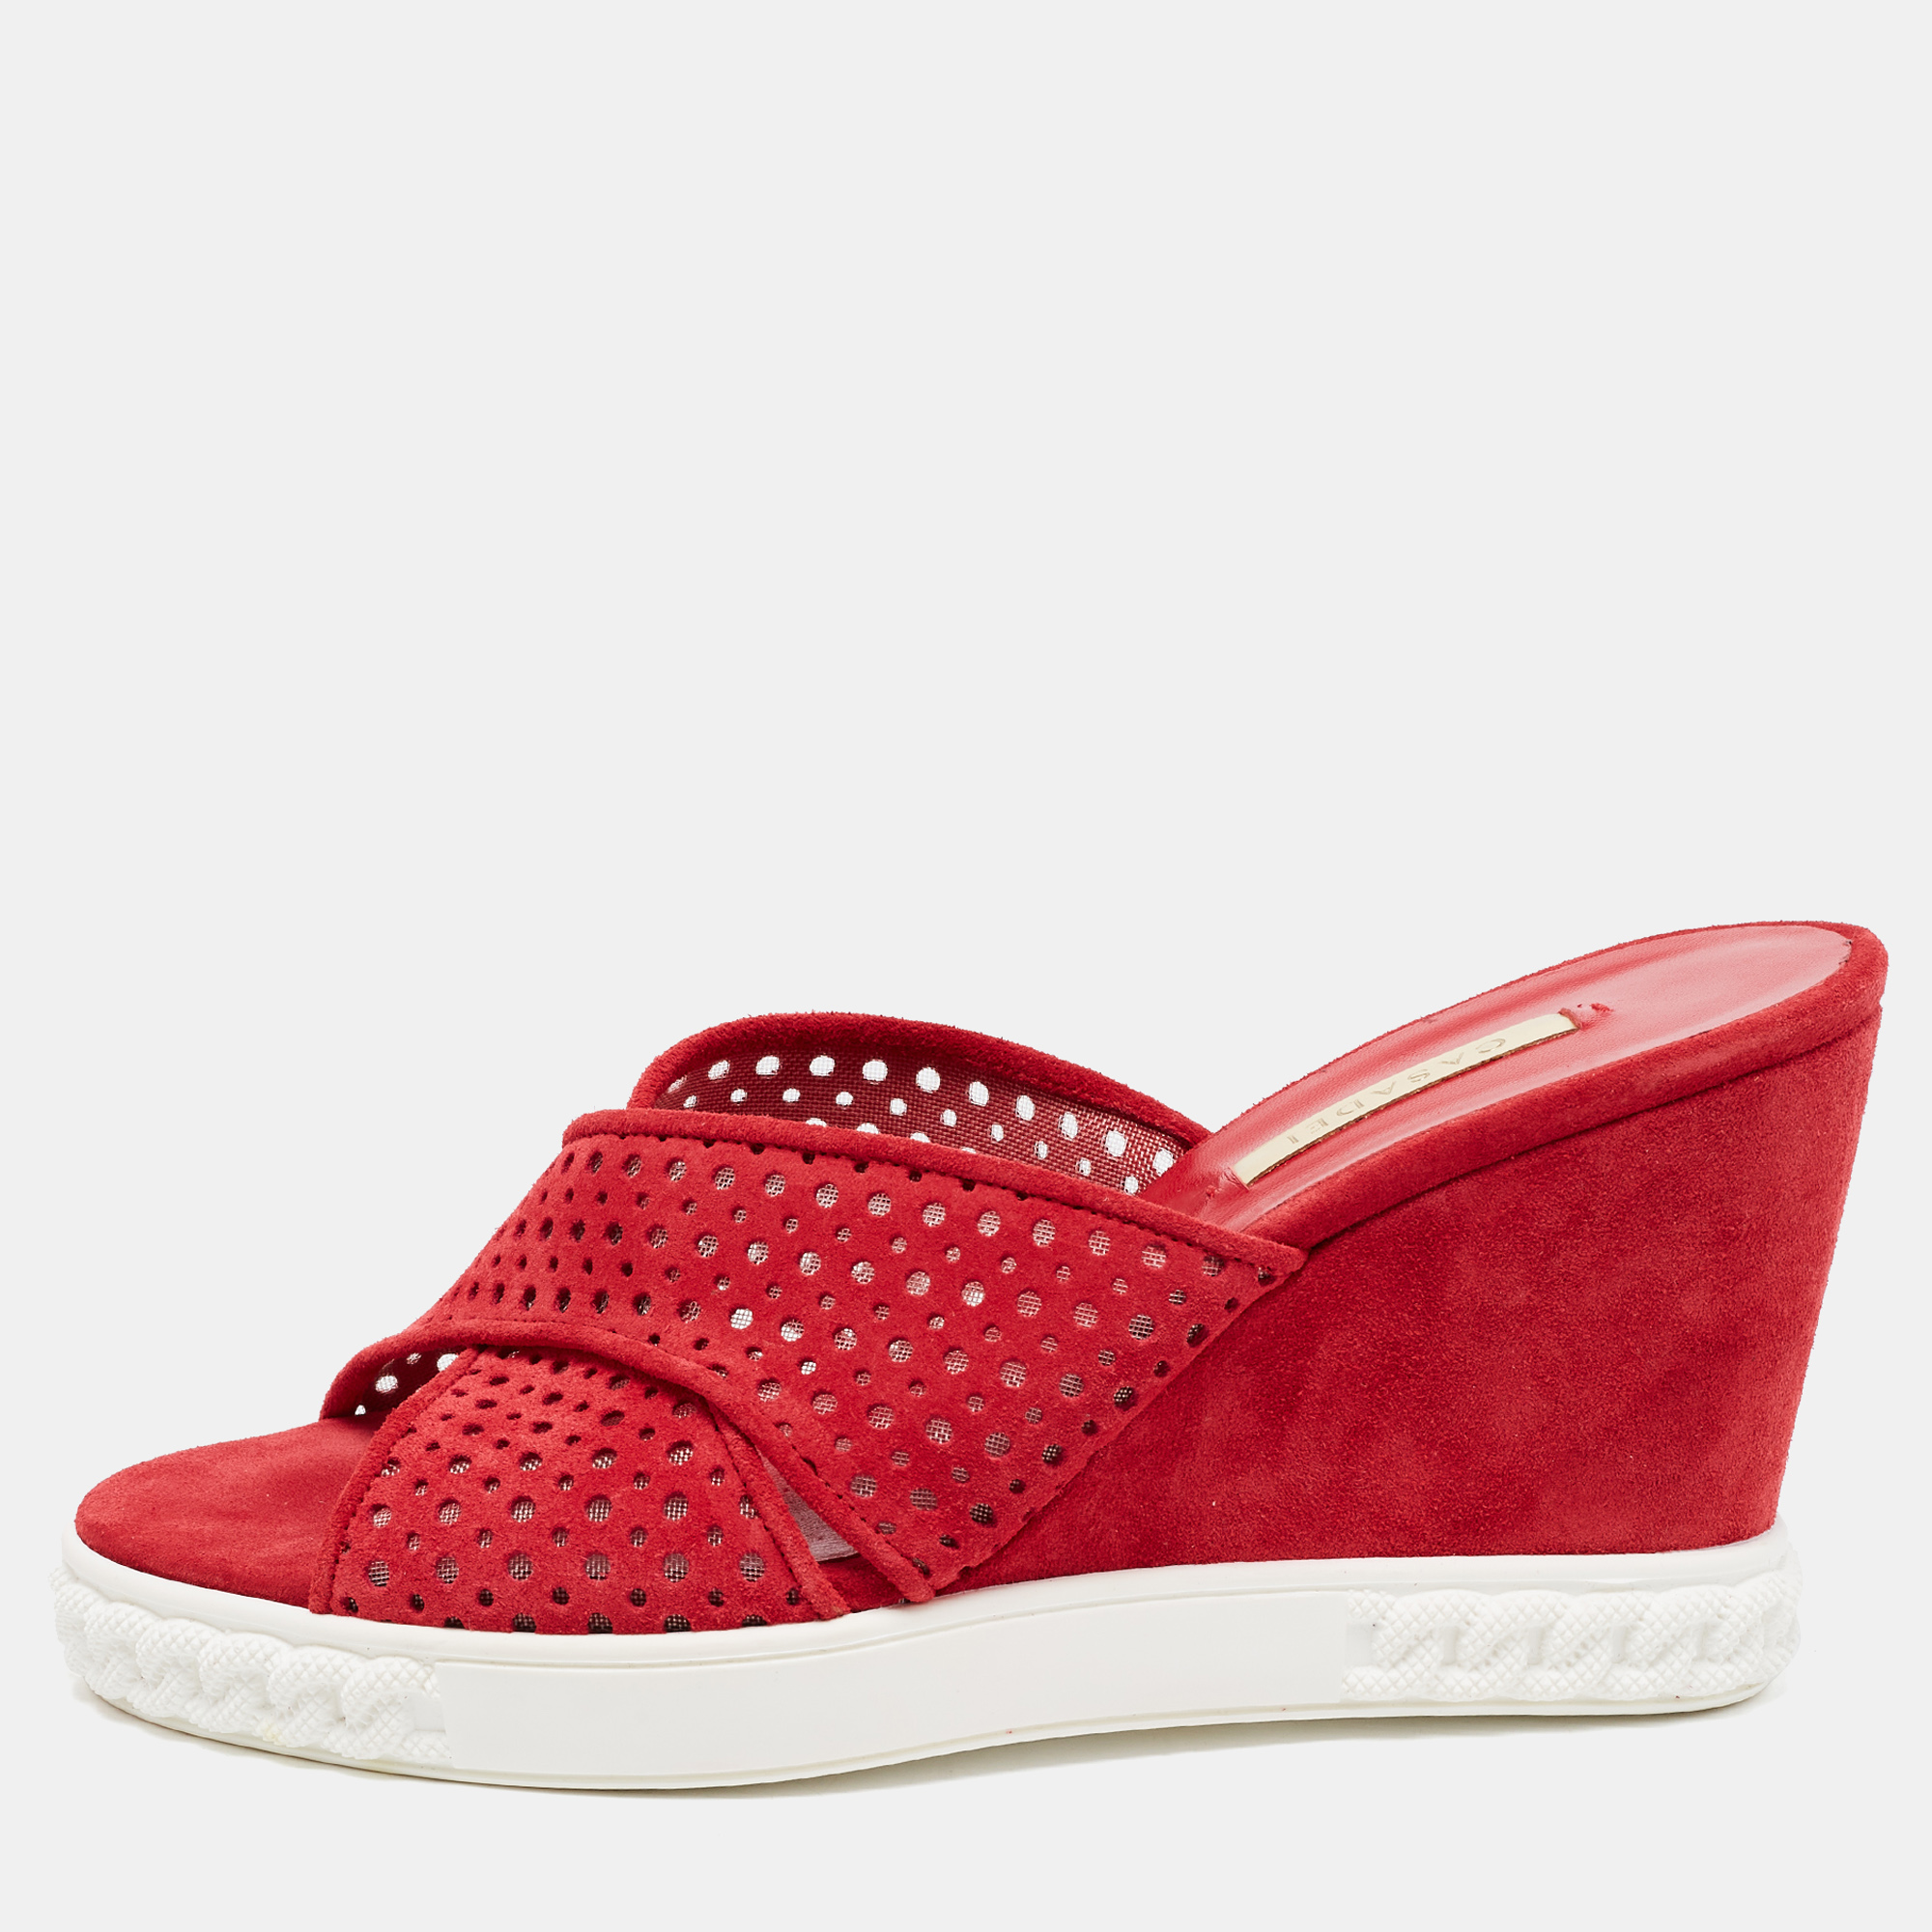 Casadei red suede perforated wedge sandals size 39